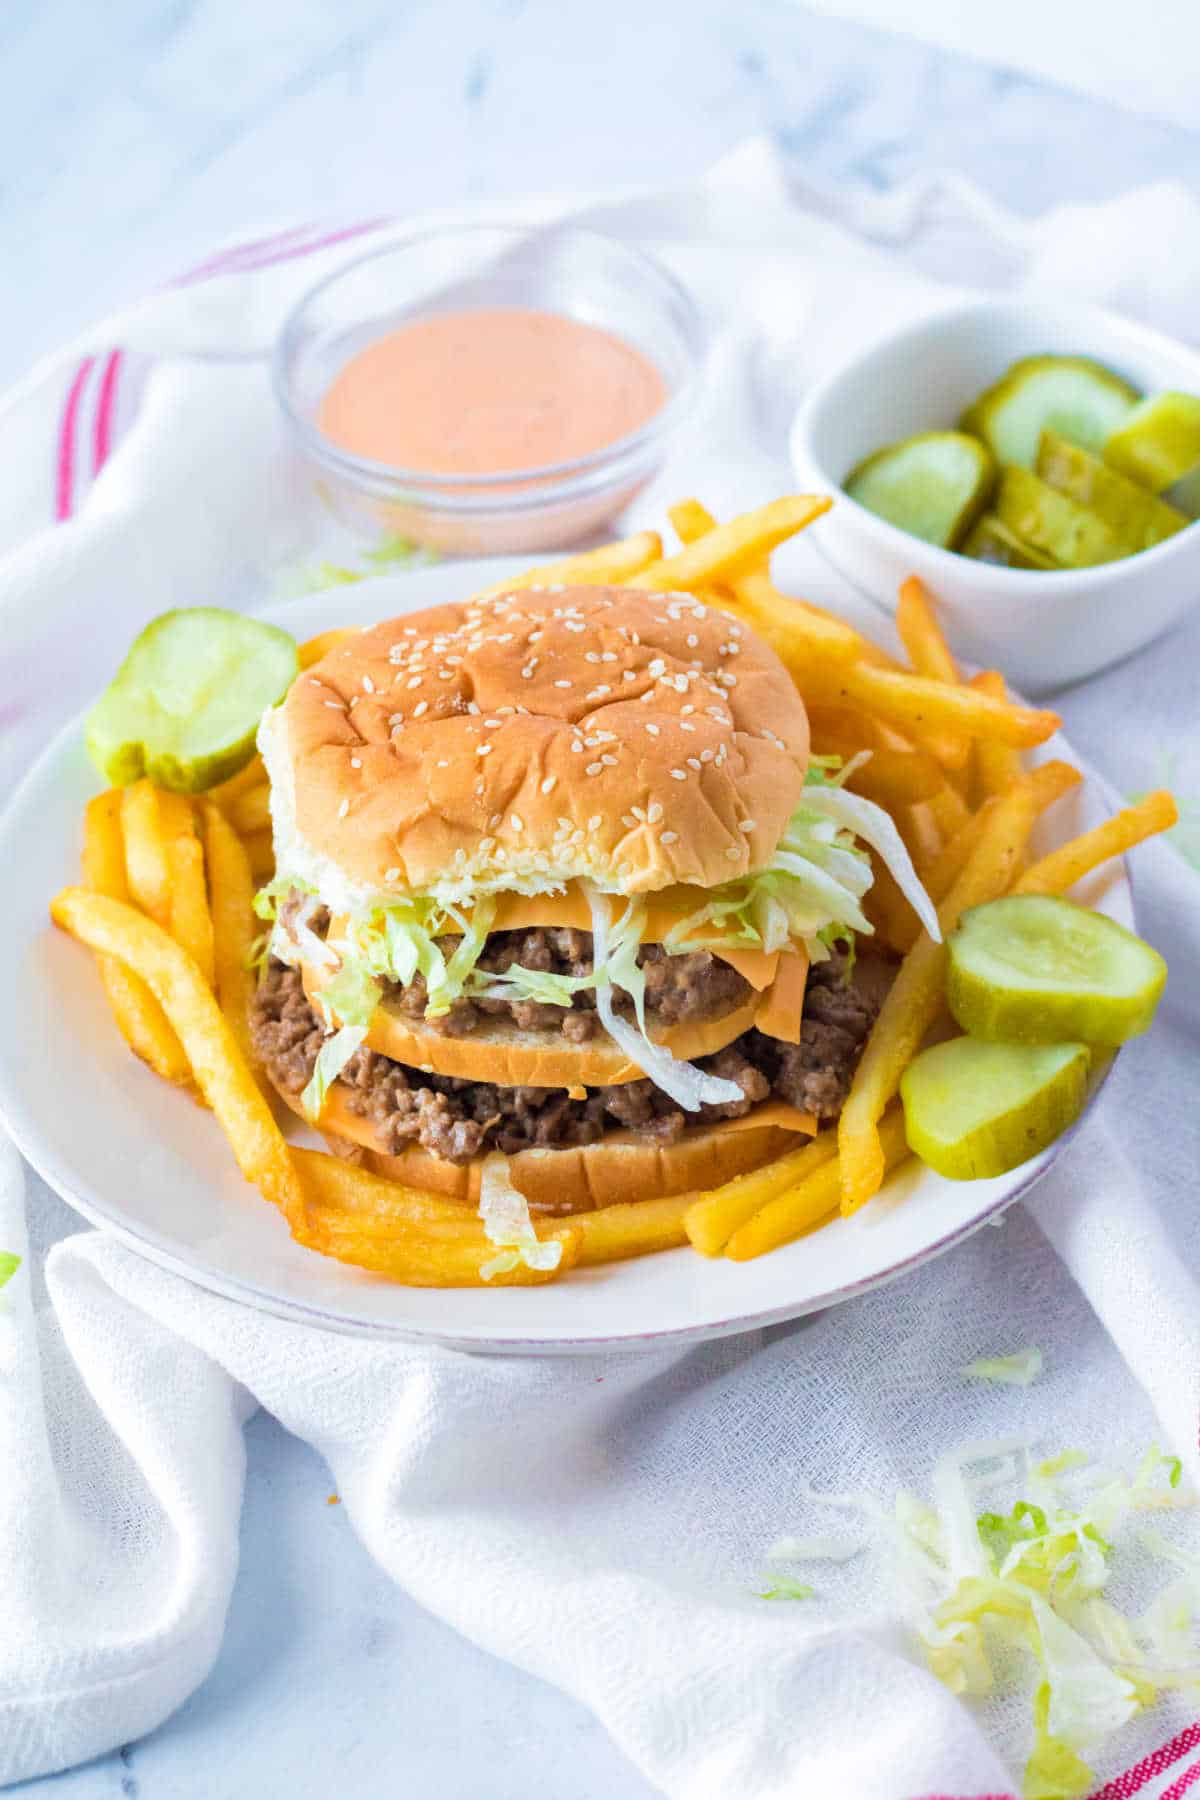 A big mac sloppy joe on a plate with fries and pickles.